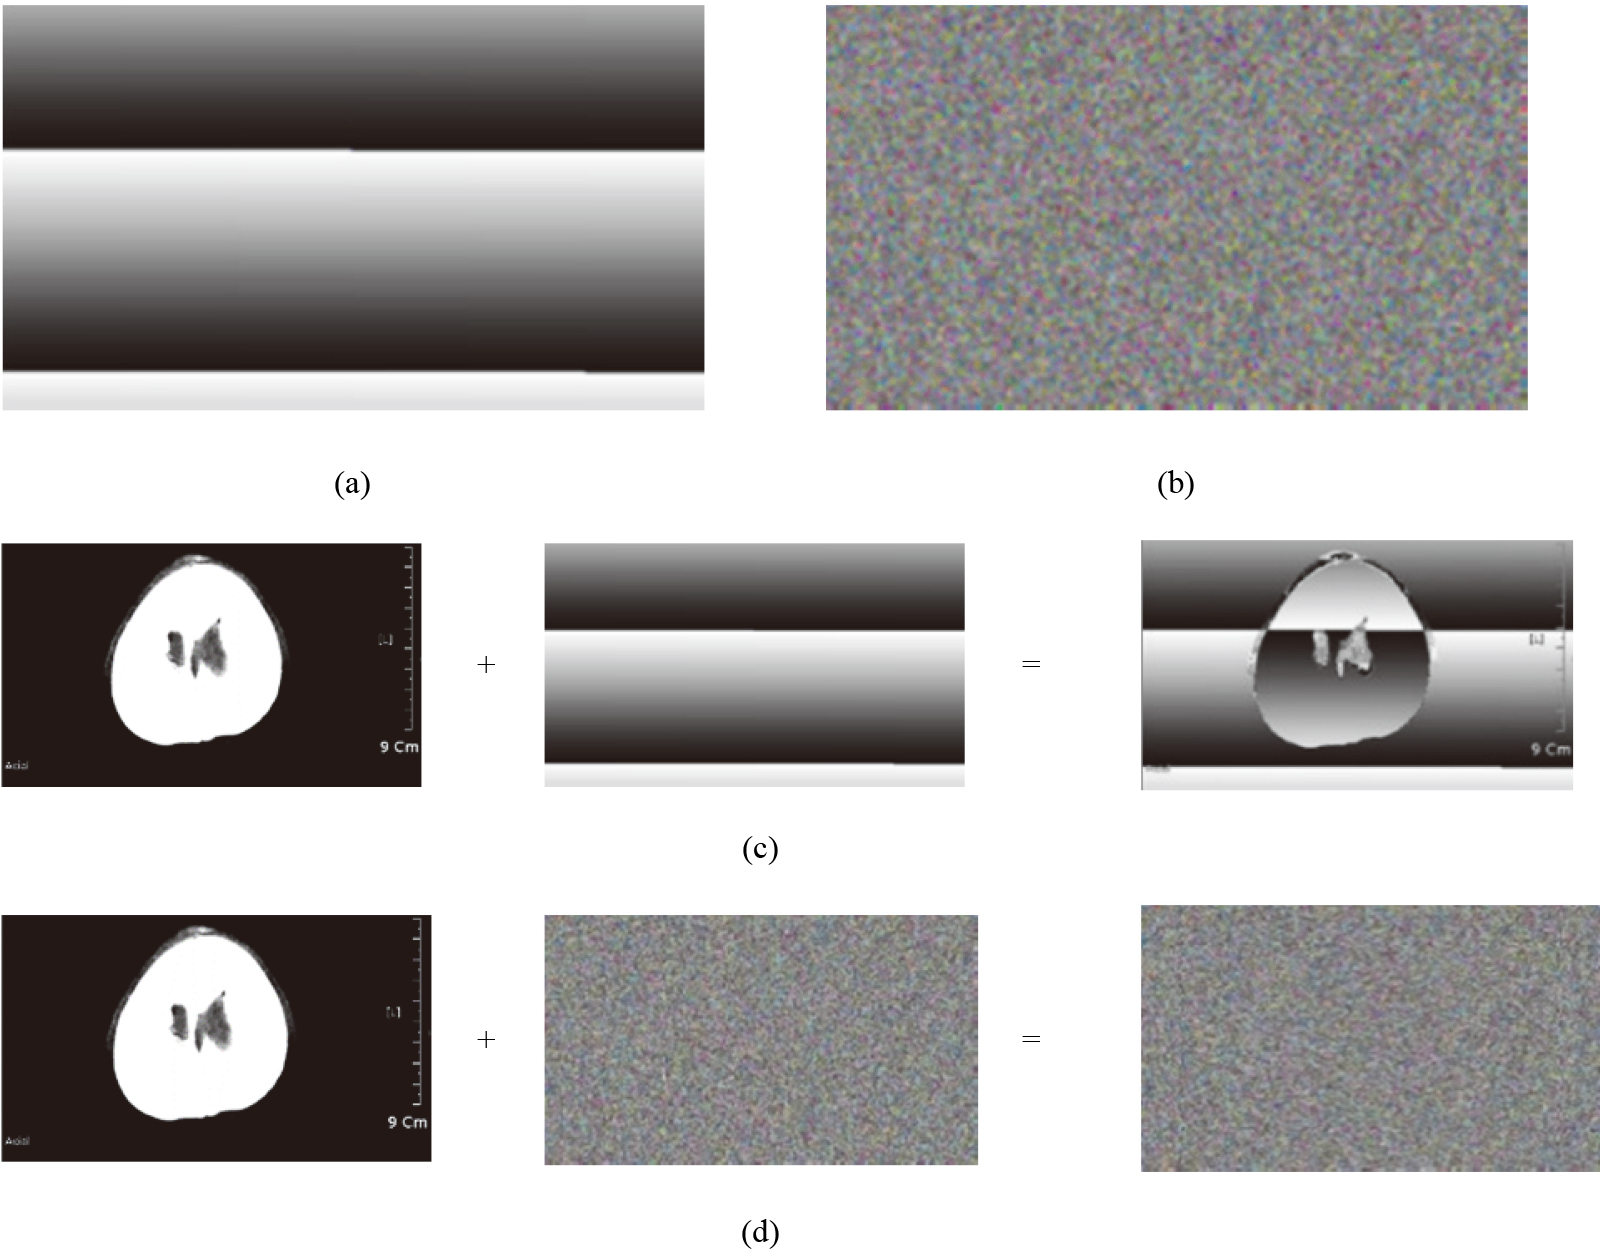 (a) Image of random bit based on time stamp and (b) from proposed algorithms. (c) Randomized image obtained using time stamp noise and (d) proposed algorithm.